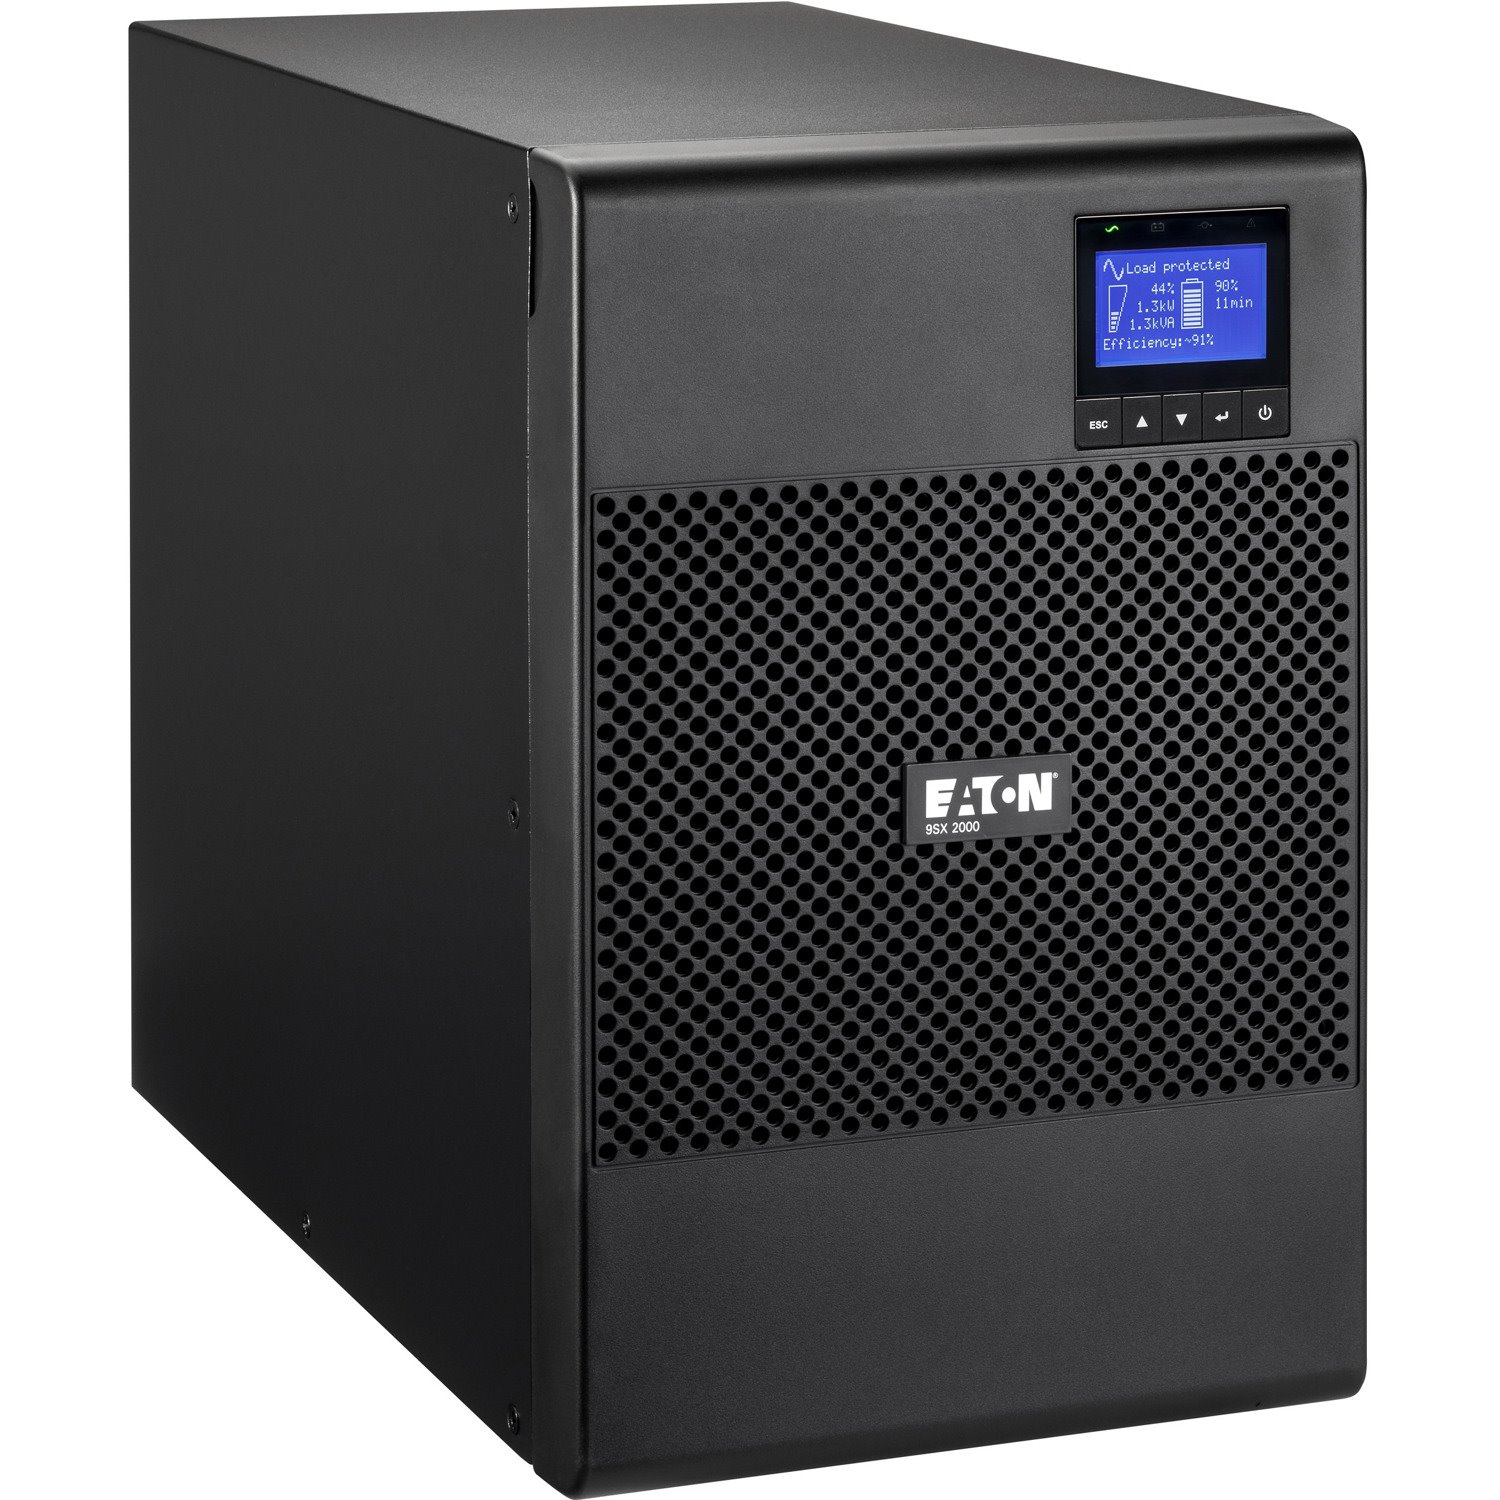 Eaton 9SX 2000VA 1800W 208V Online Double-Conversion UPS - 8 C13 Outlets, Cybersecure Network Card Option, Extended Run, Tower - Battery Backup